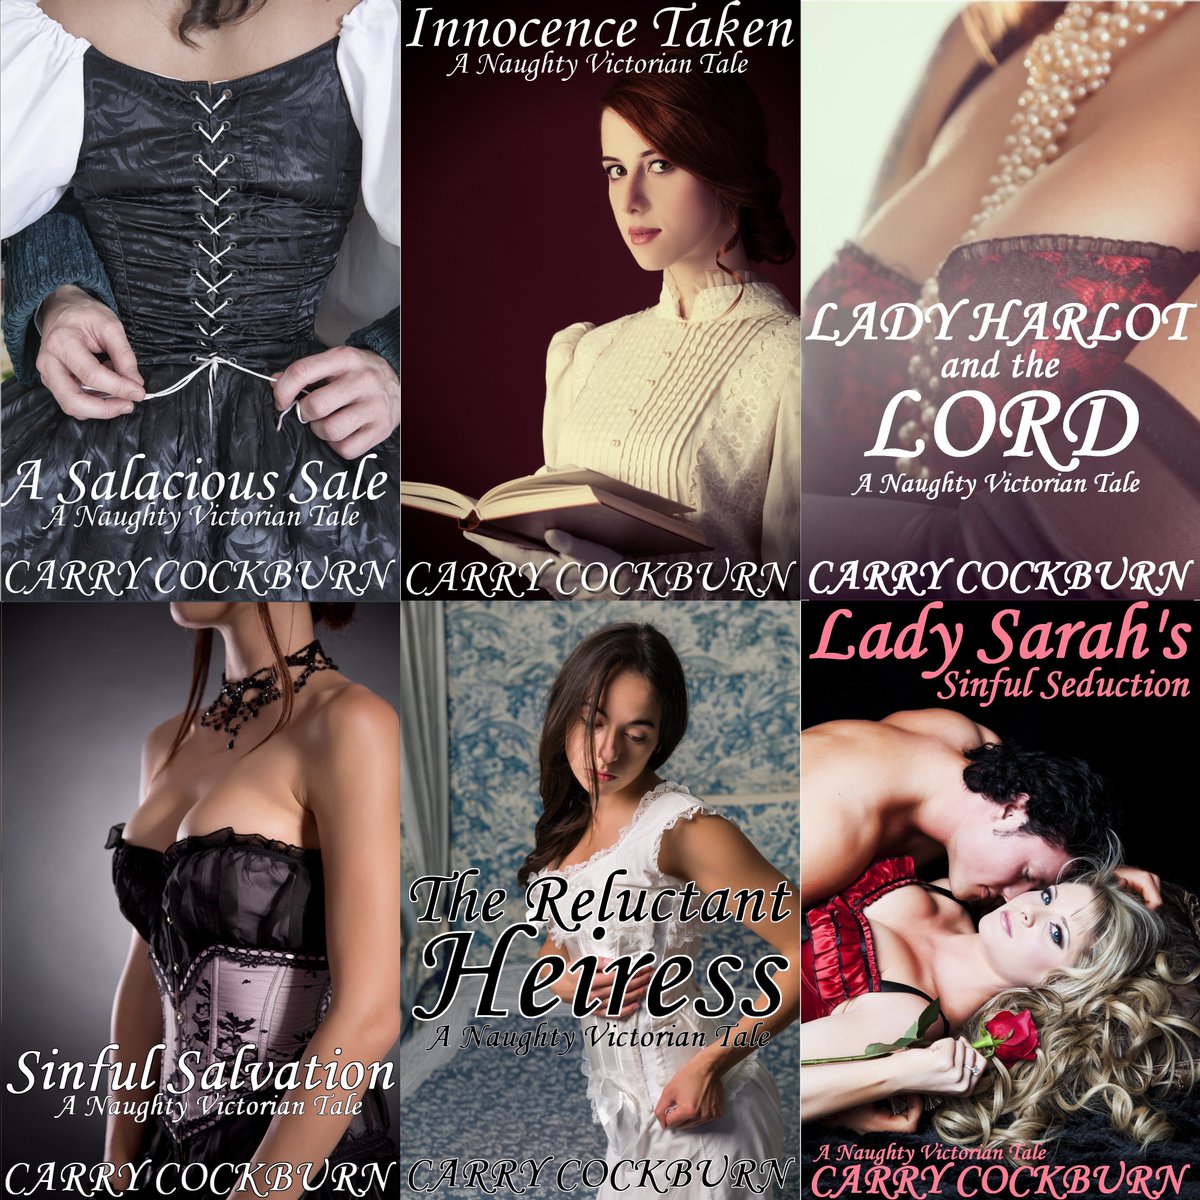 #PleaseRP A cornucopia of Victorian naughtiness! 💮mybook.to/SalaciousSale 💮mybook.to/Innocence-Taken 💮mybook.to/LadyHarlot 💮mybook.to/SinfulSeduction 💮mybook.to/TheReluctantHe… 💮mybook.to/SinfulSalvation #KindleUnlimited #Victorian #Tales📚